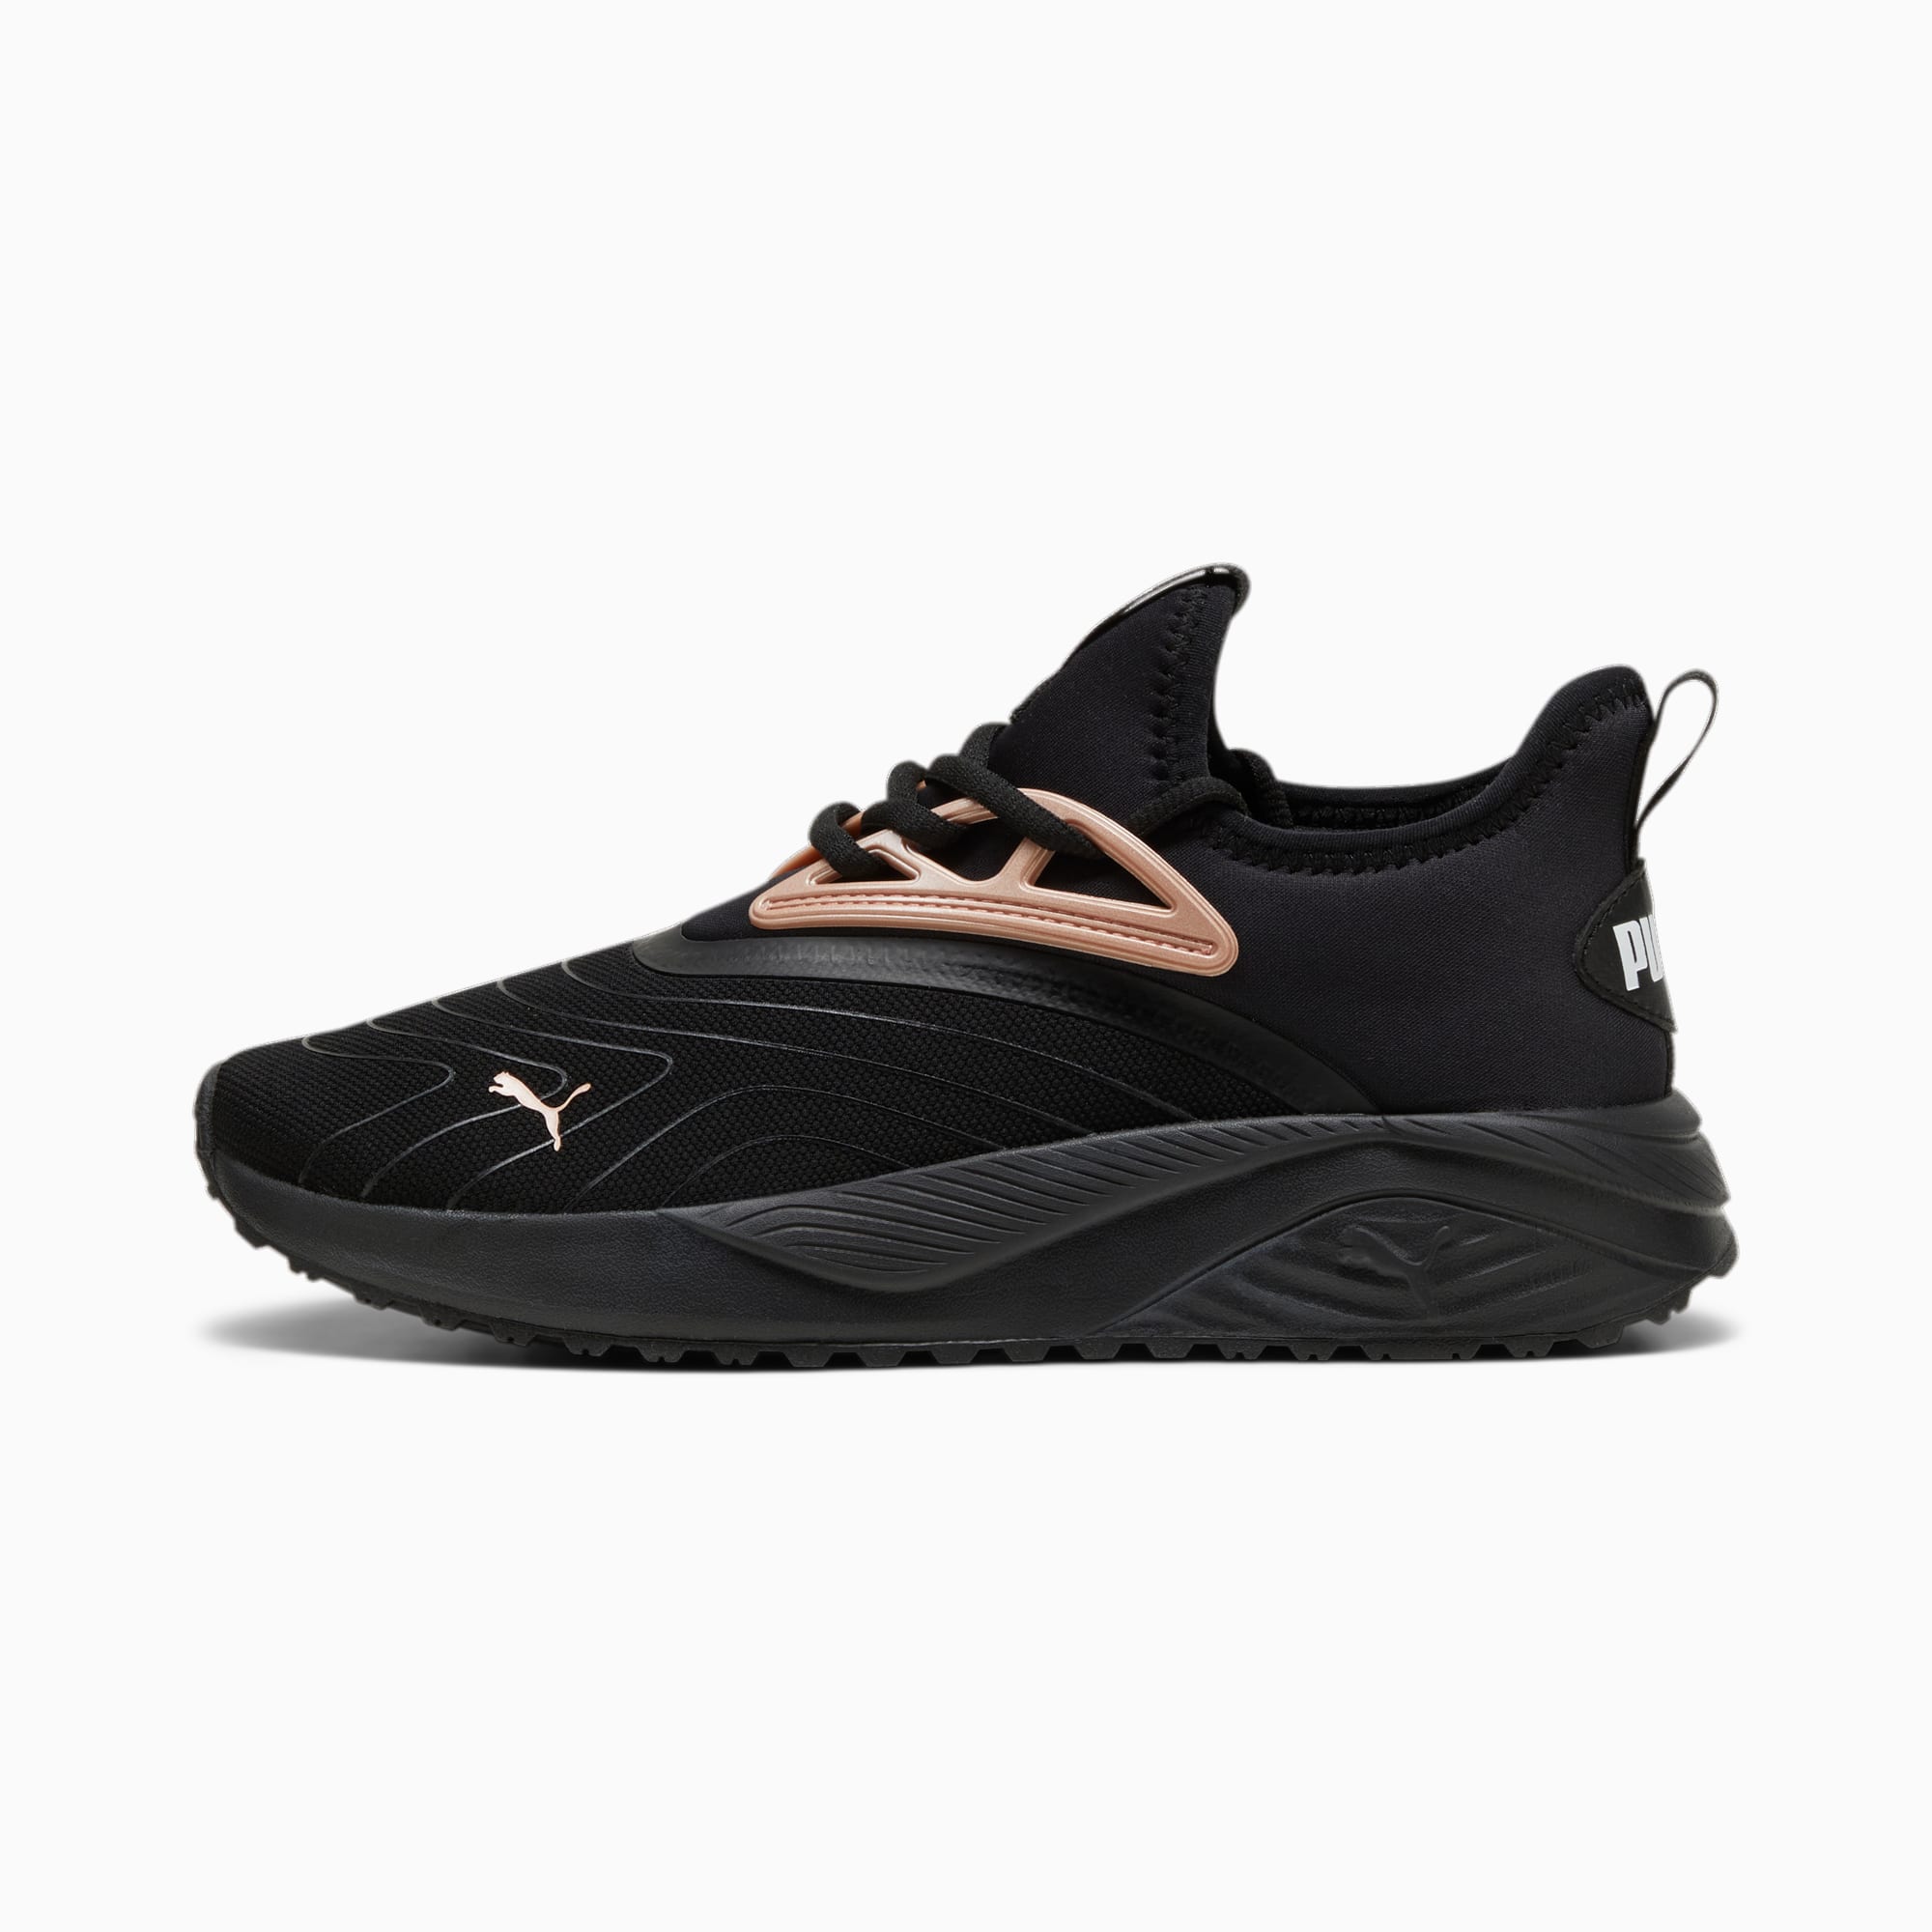 PUMA Pacer Beauty Women's Sneakers, Black/Rose Gold/White